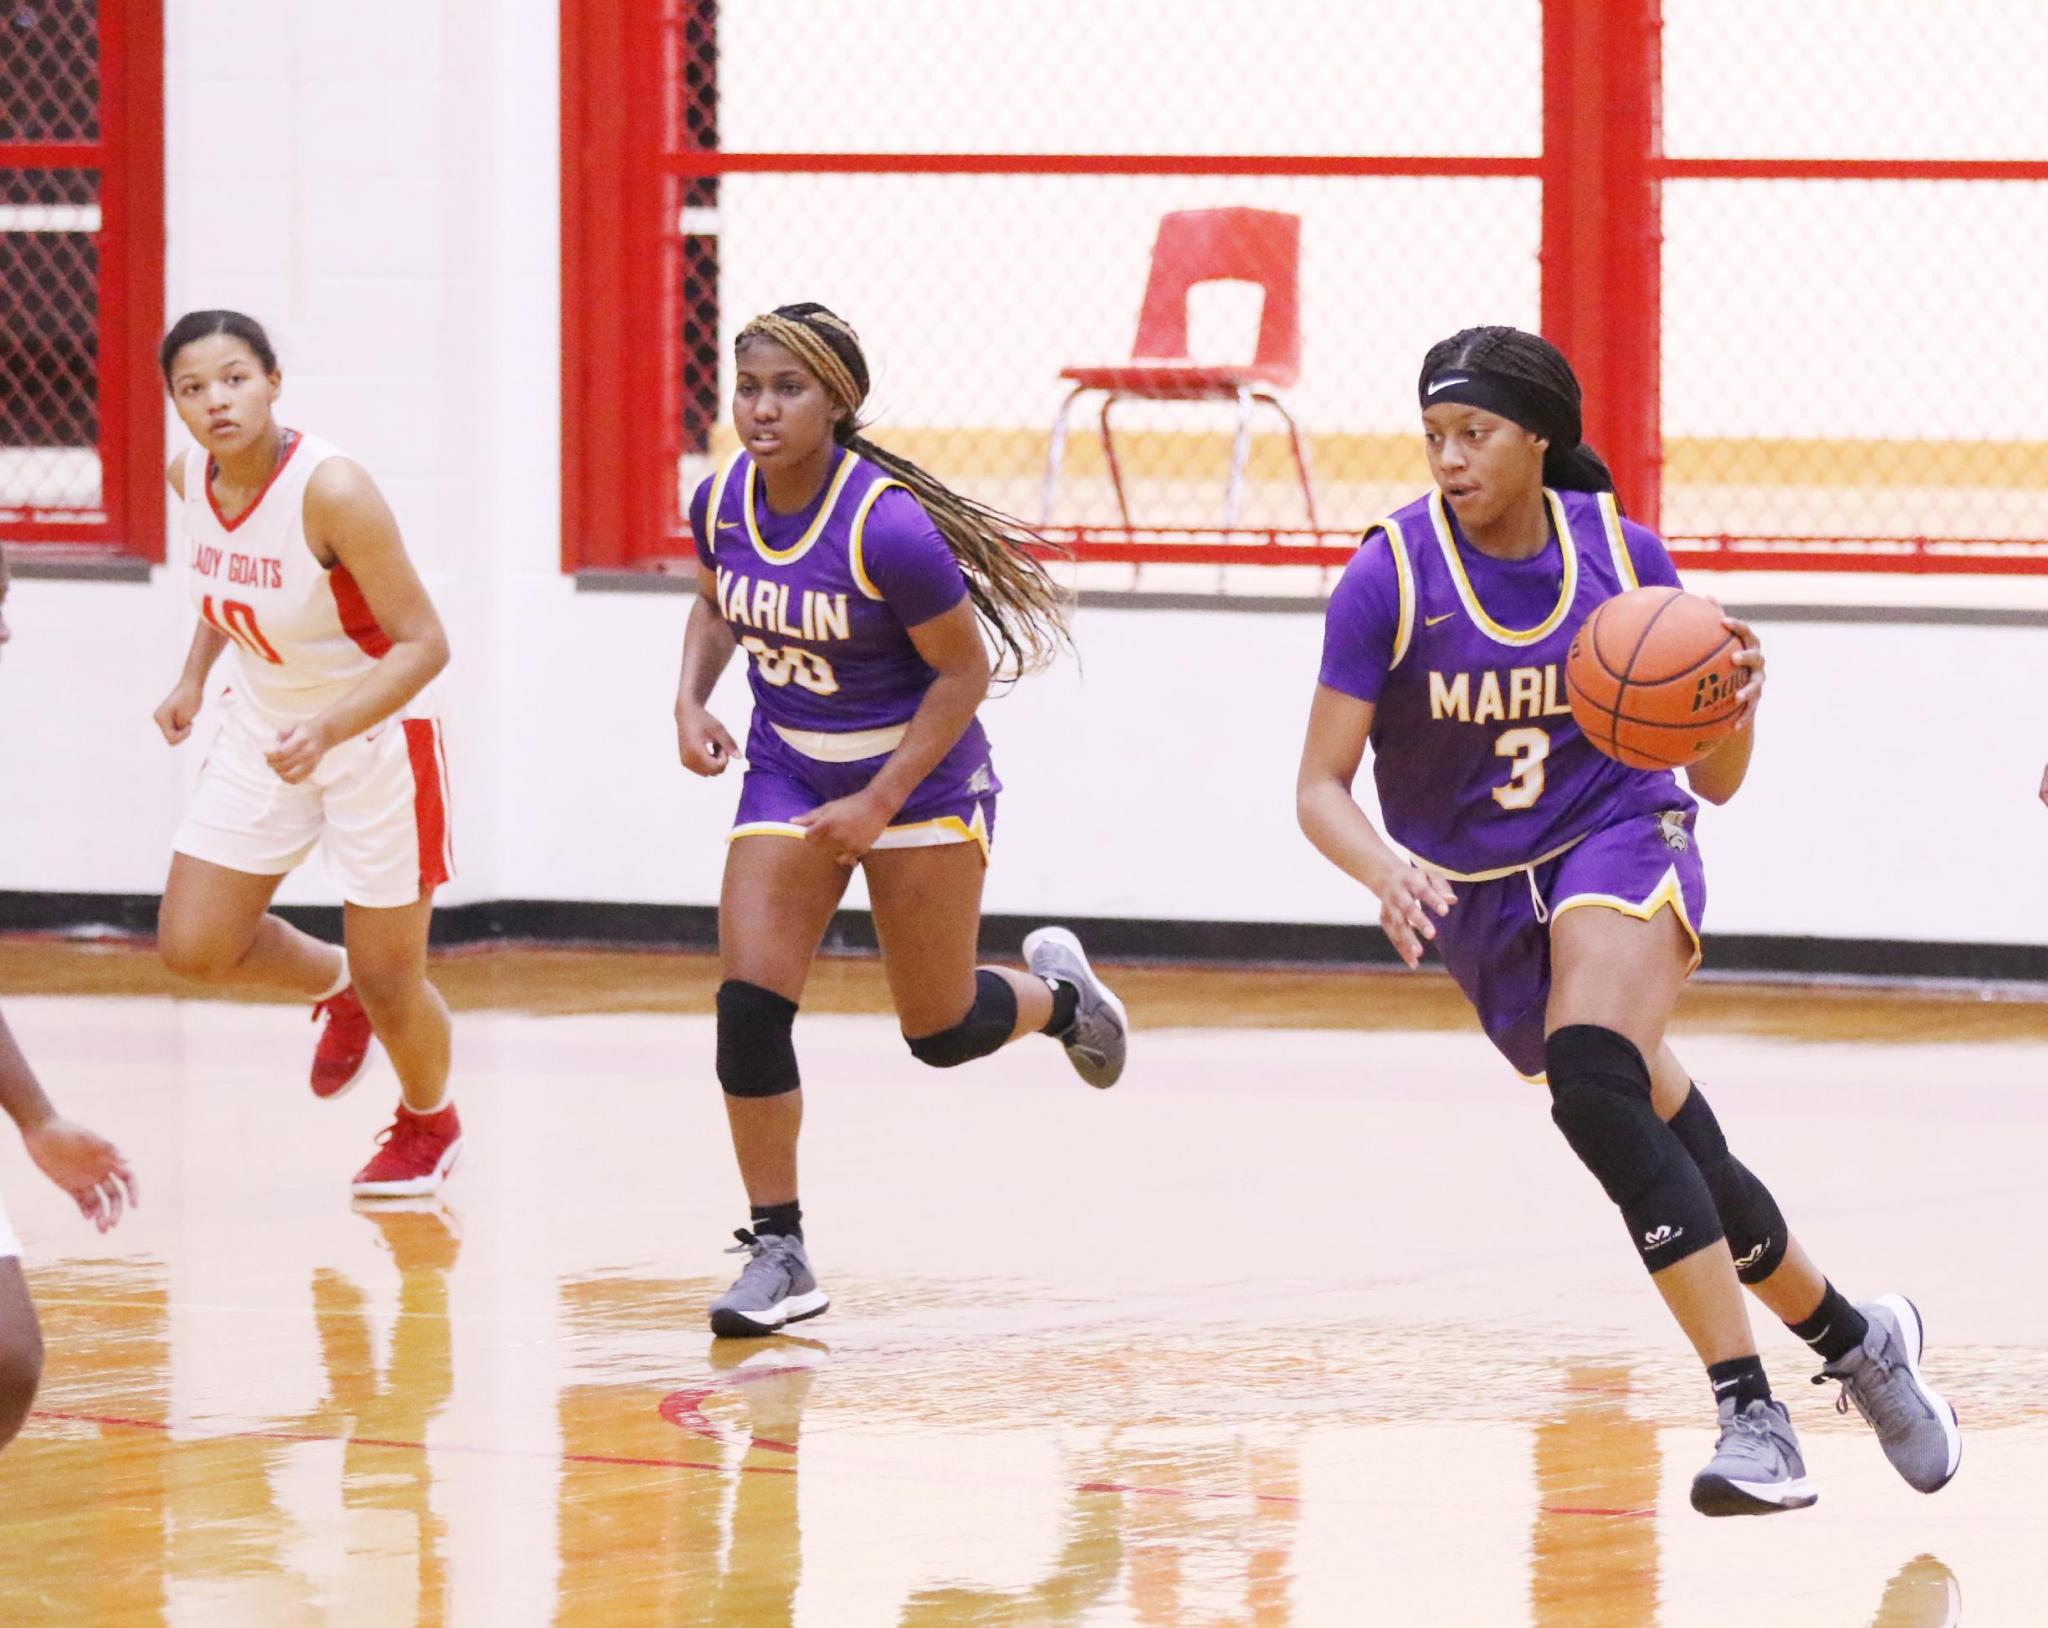 Marlin's Taliyah Davis dribbles toward the basket ahead of a Groesbeck player as teammate Kendria Mason (10) runs with her during a game in Groesbeck on Friday night.Photo by Angela Crane/For the Marlin Democrat